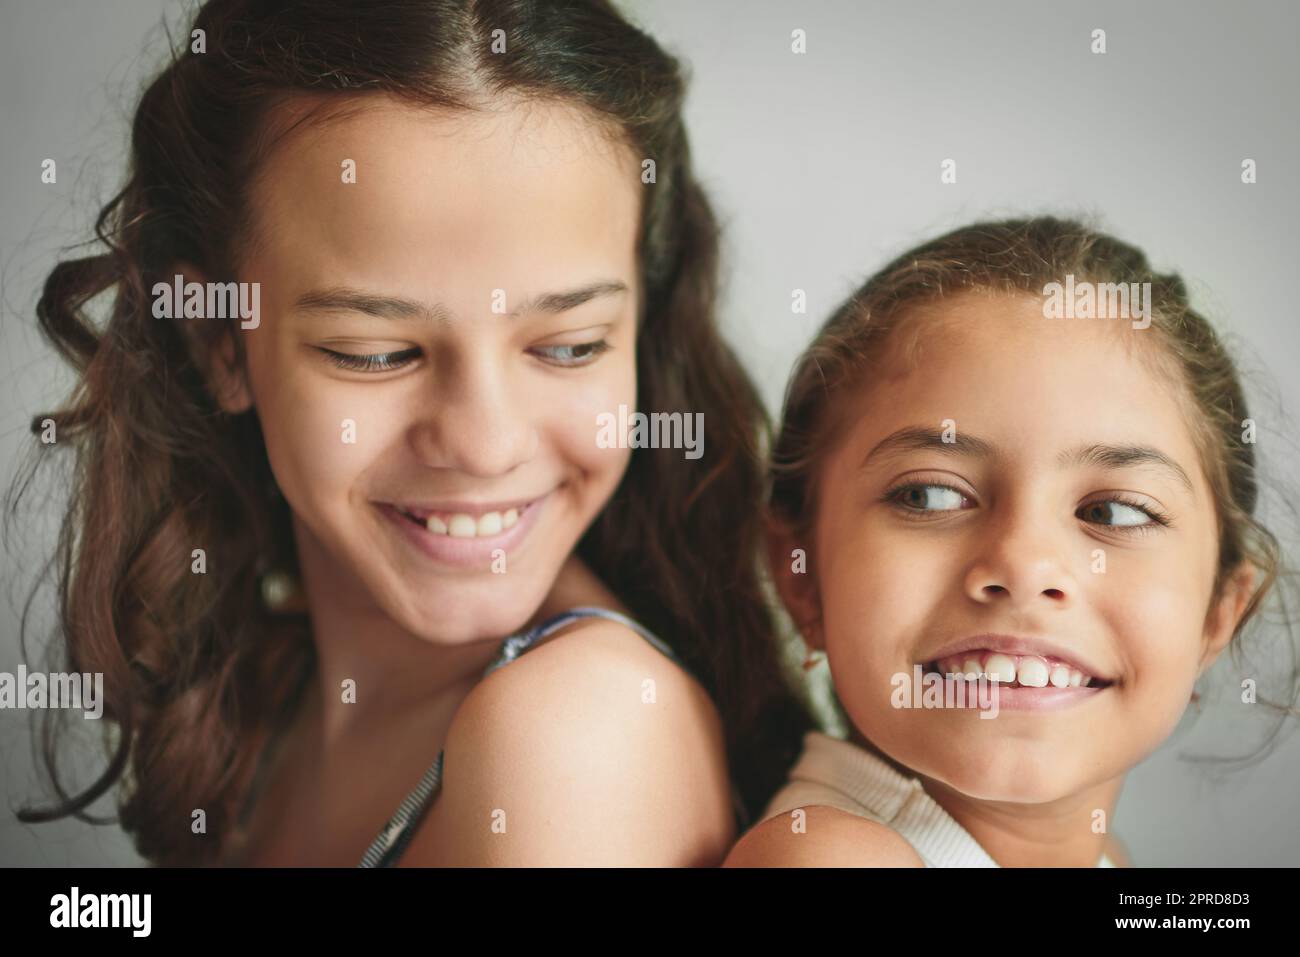 No one understands me like she does. two young girls spending time together at home. Stock Photo